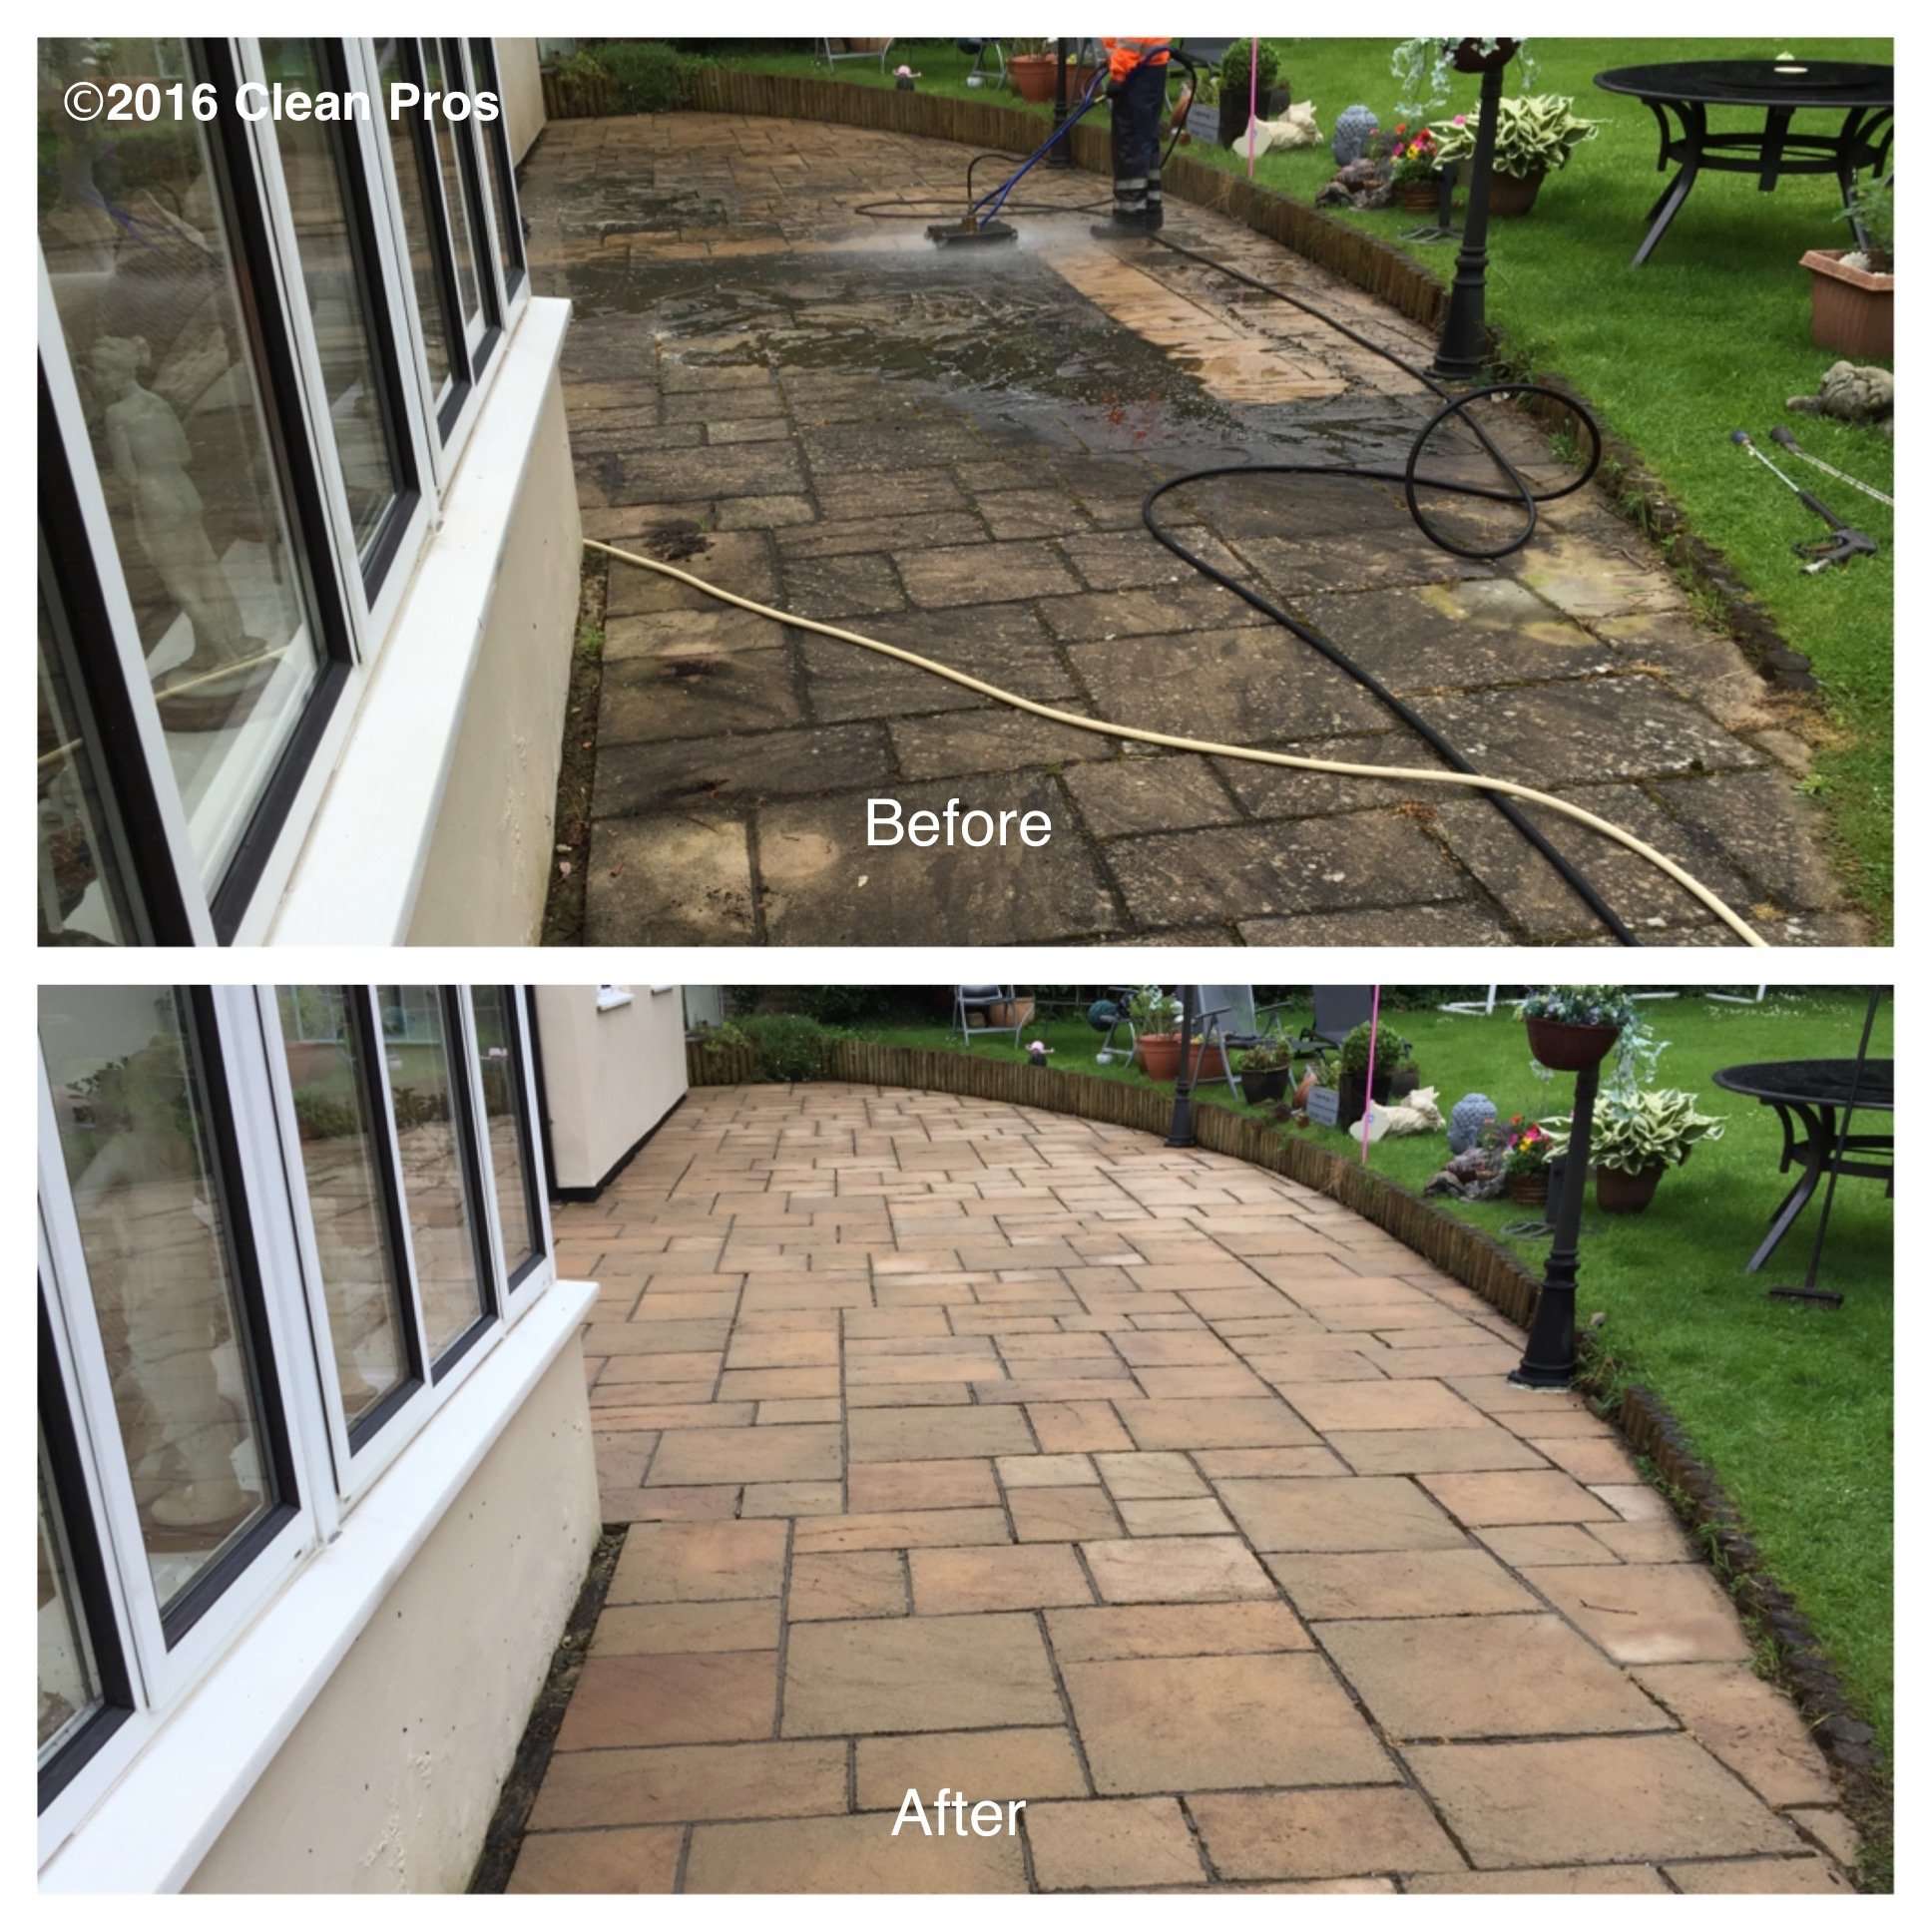 How To Clean Patio Pavers With Vinegar / Proper Technique ...